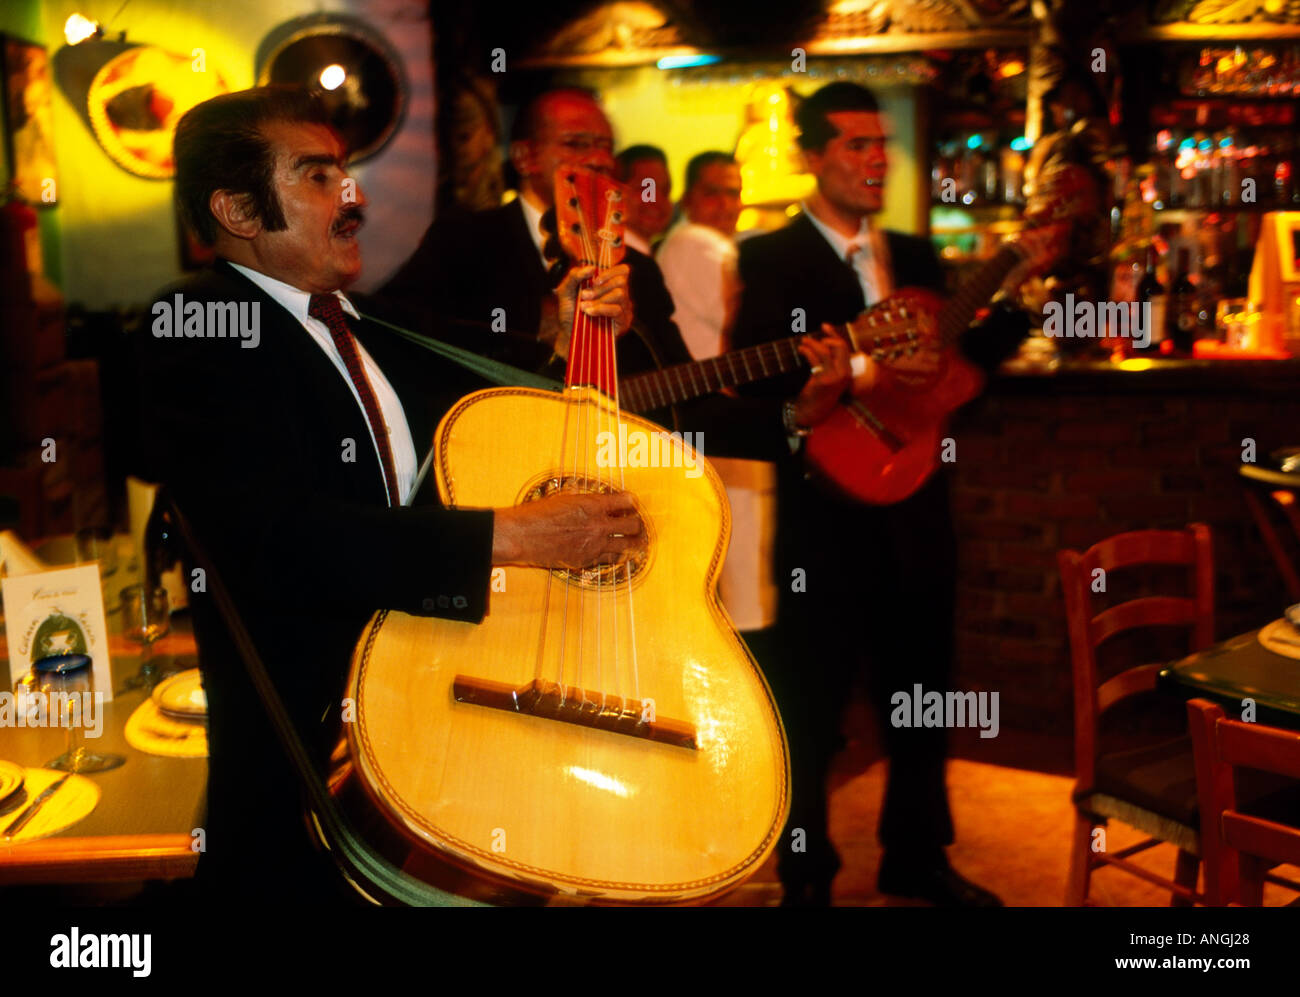 Musicians playing guitar in a restaurant bar in Mexico Stock Photo